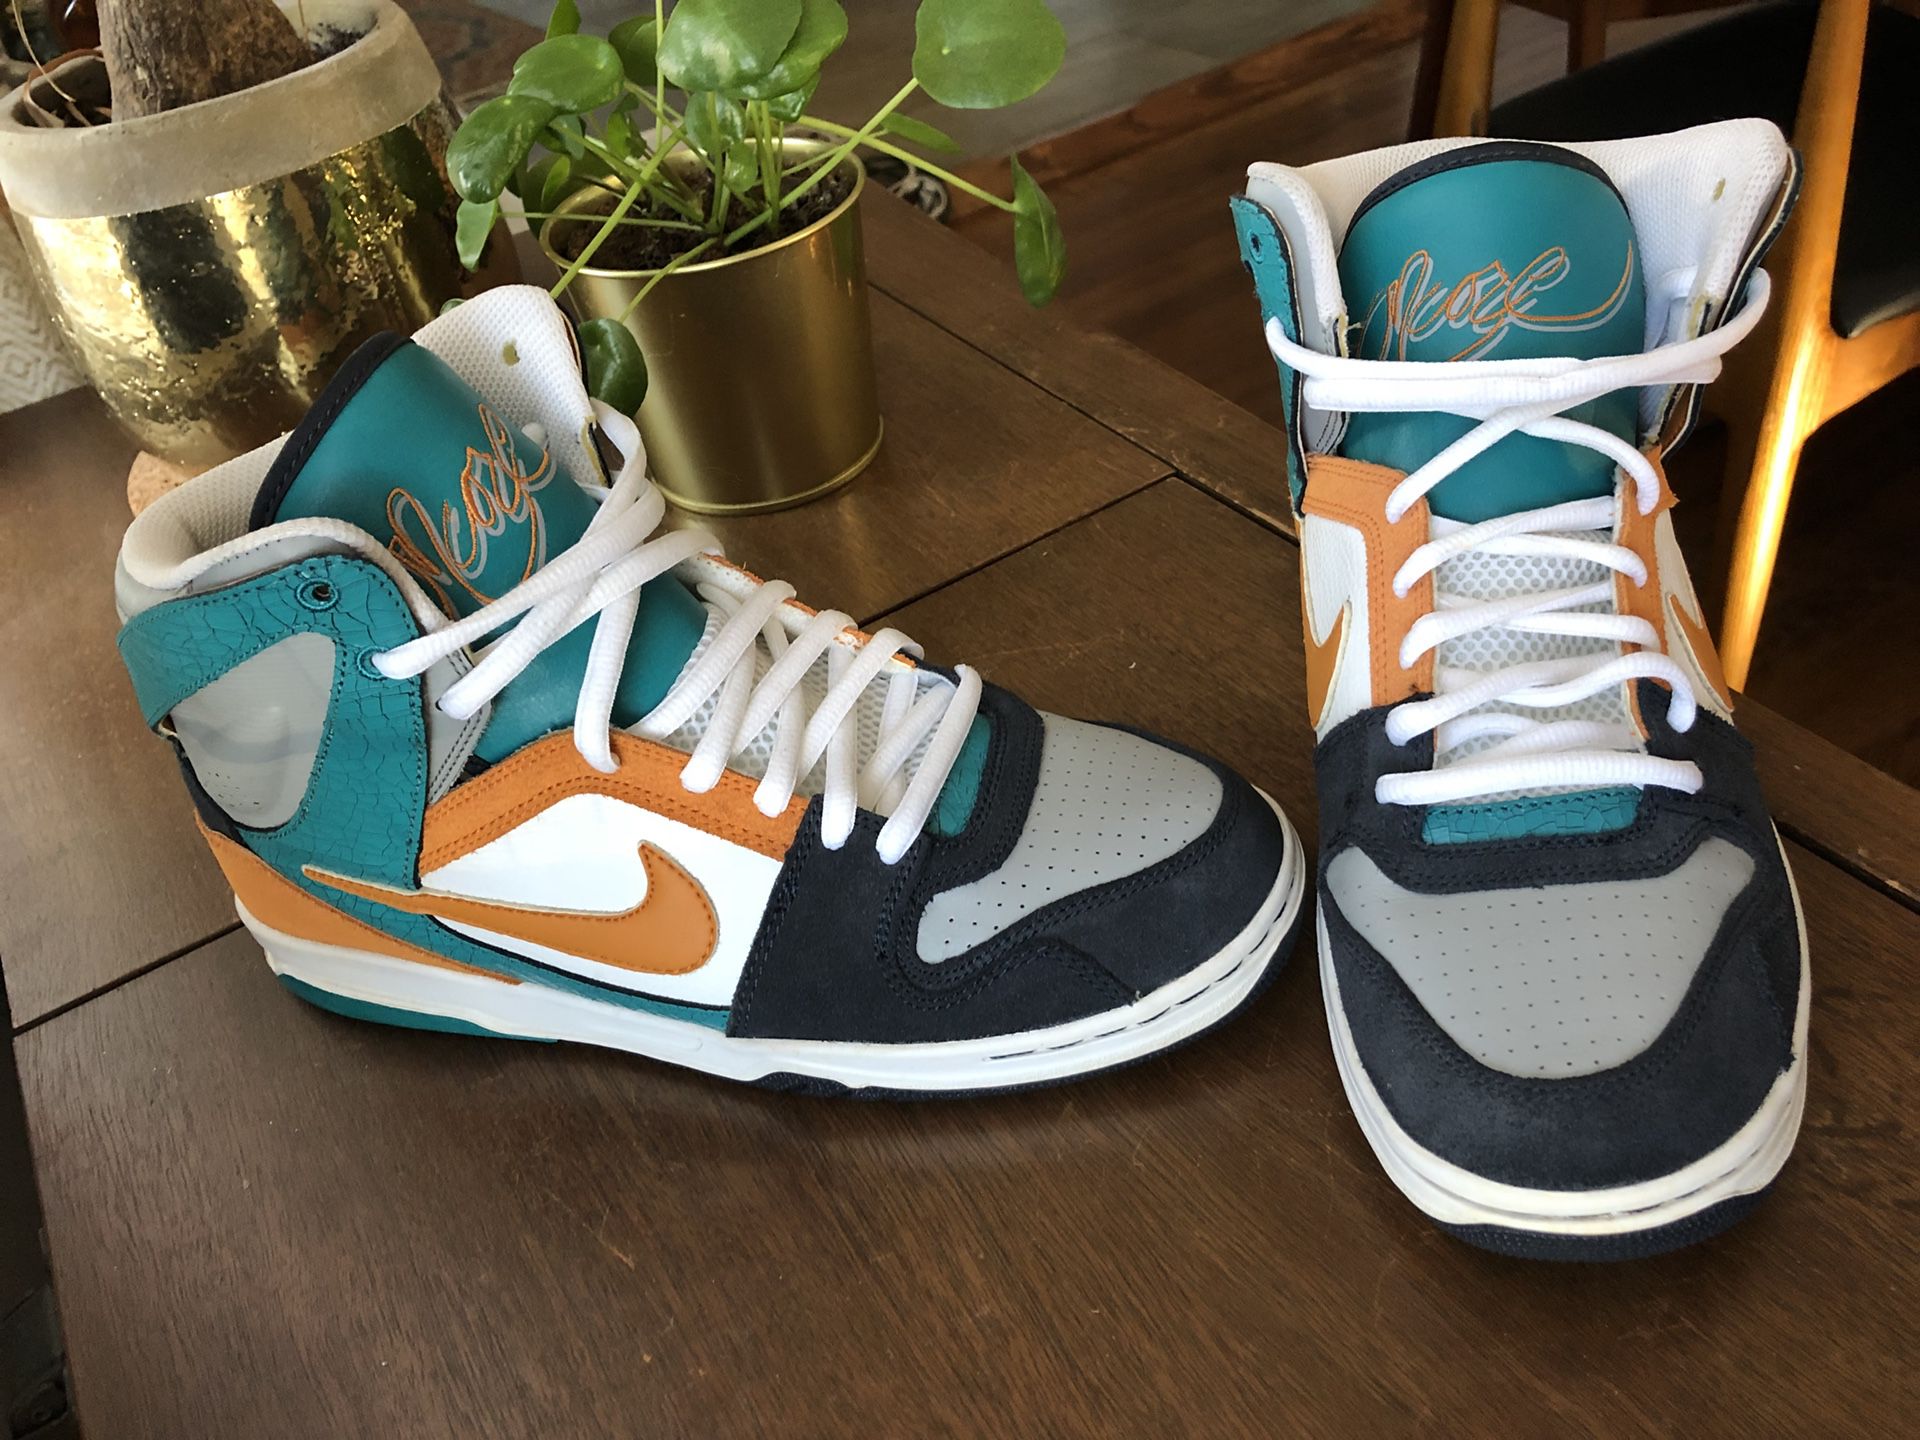 Kelder thermometer solidariteit Nike SB 6.0 Oncore High 354704-081 Men's size 8 1/2 (Miami Dolphins scheme)  for Sale in Jacksonville, FL - OfferUp